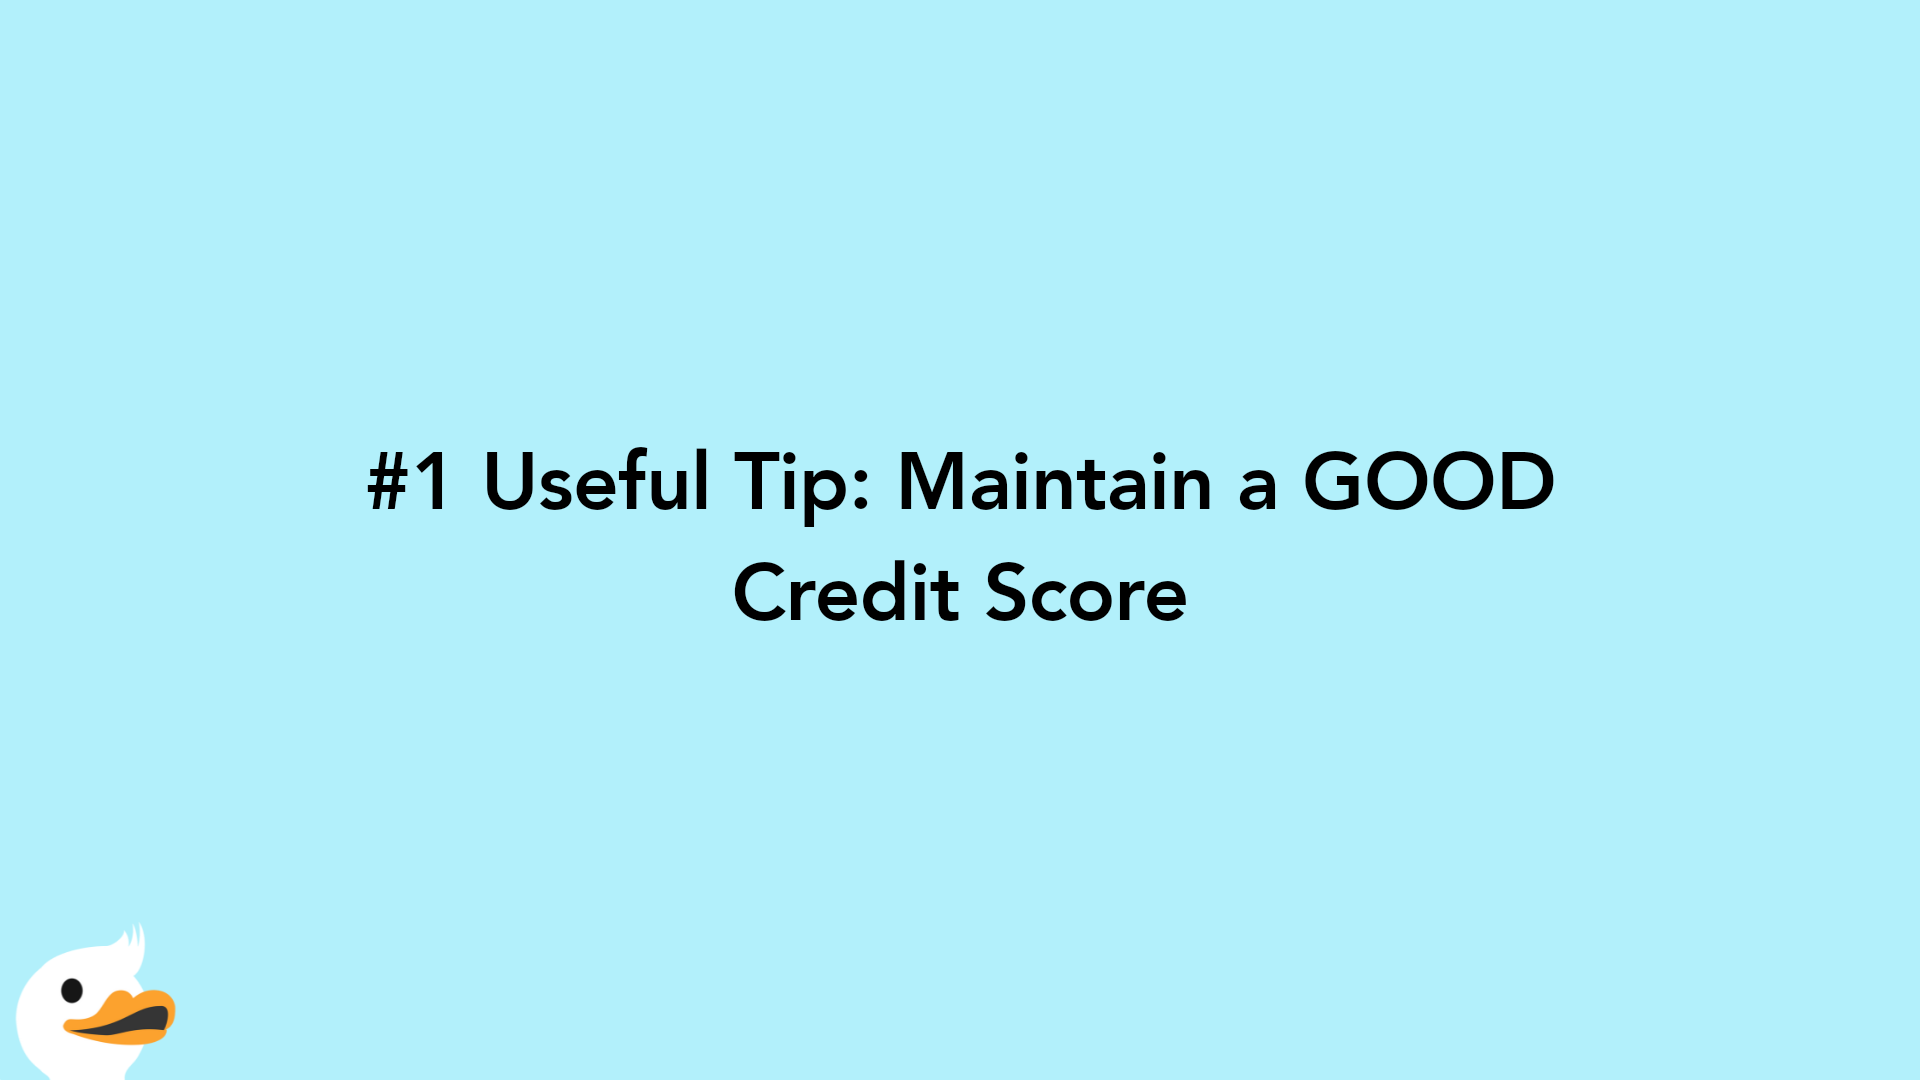 #1 Useful Tip: Maintain a GOOD Credit Score